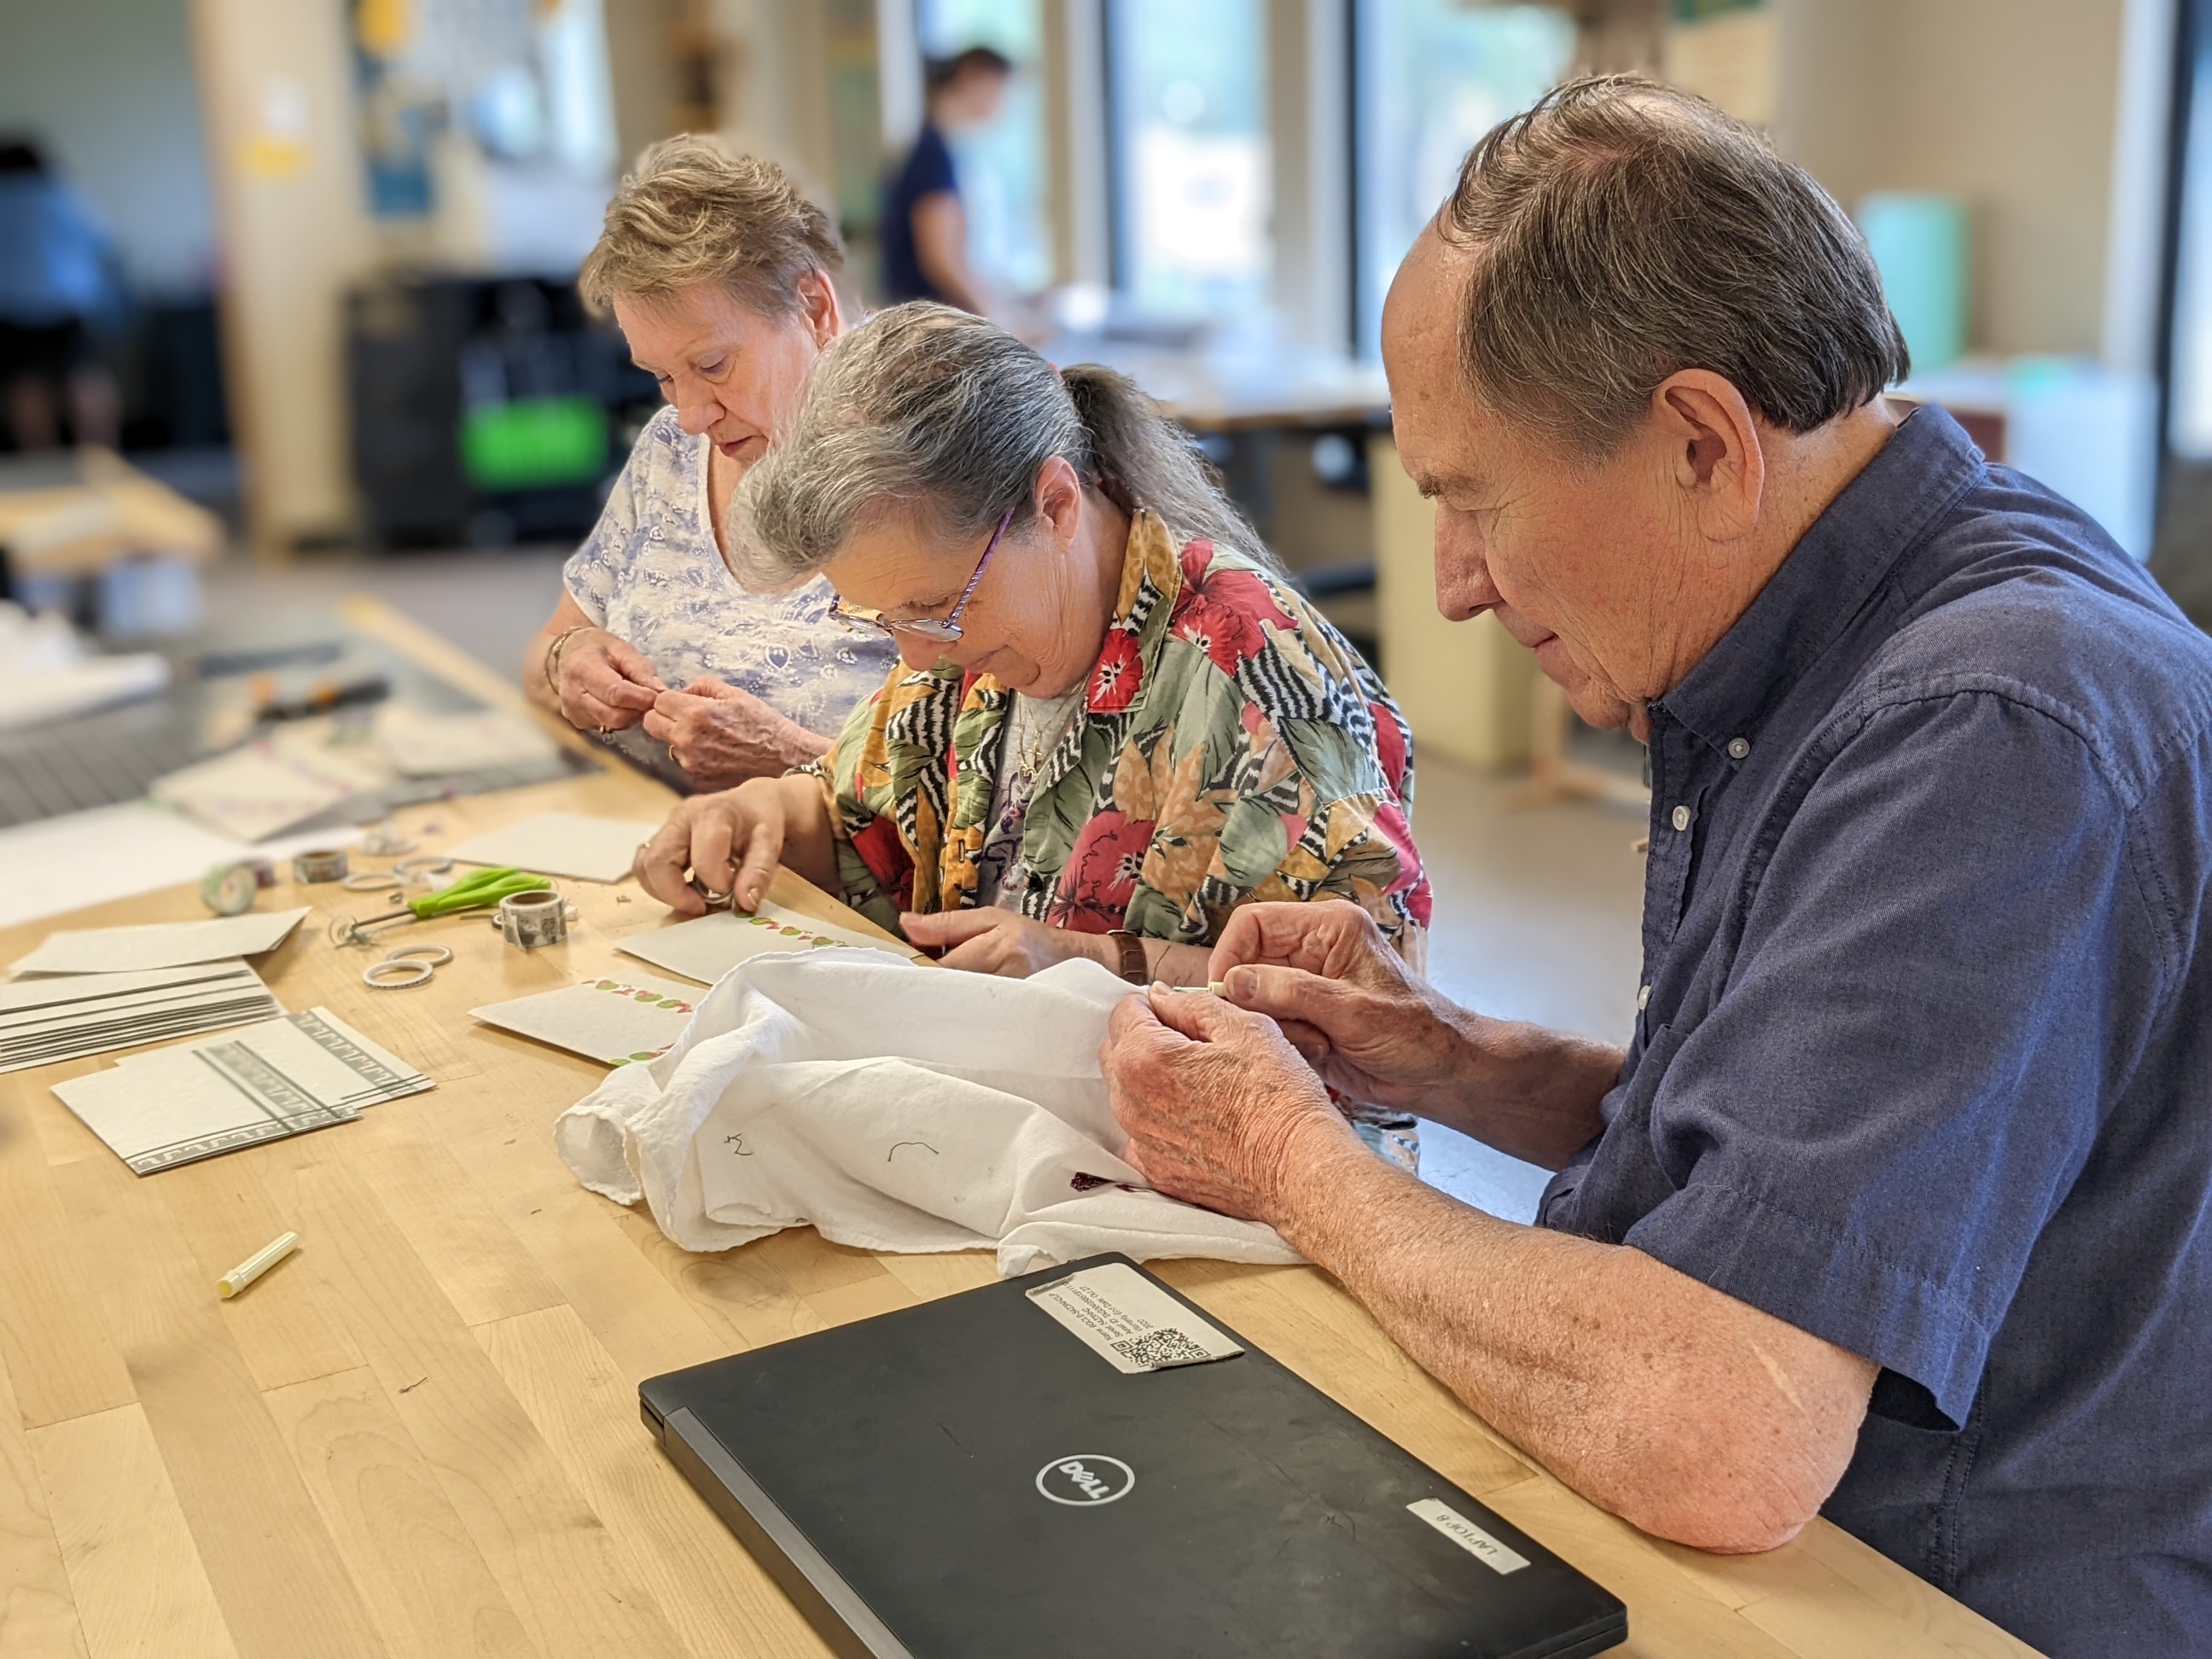 Older adults working on craft projects together